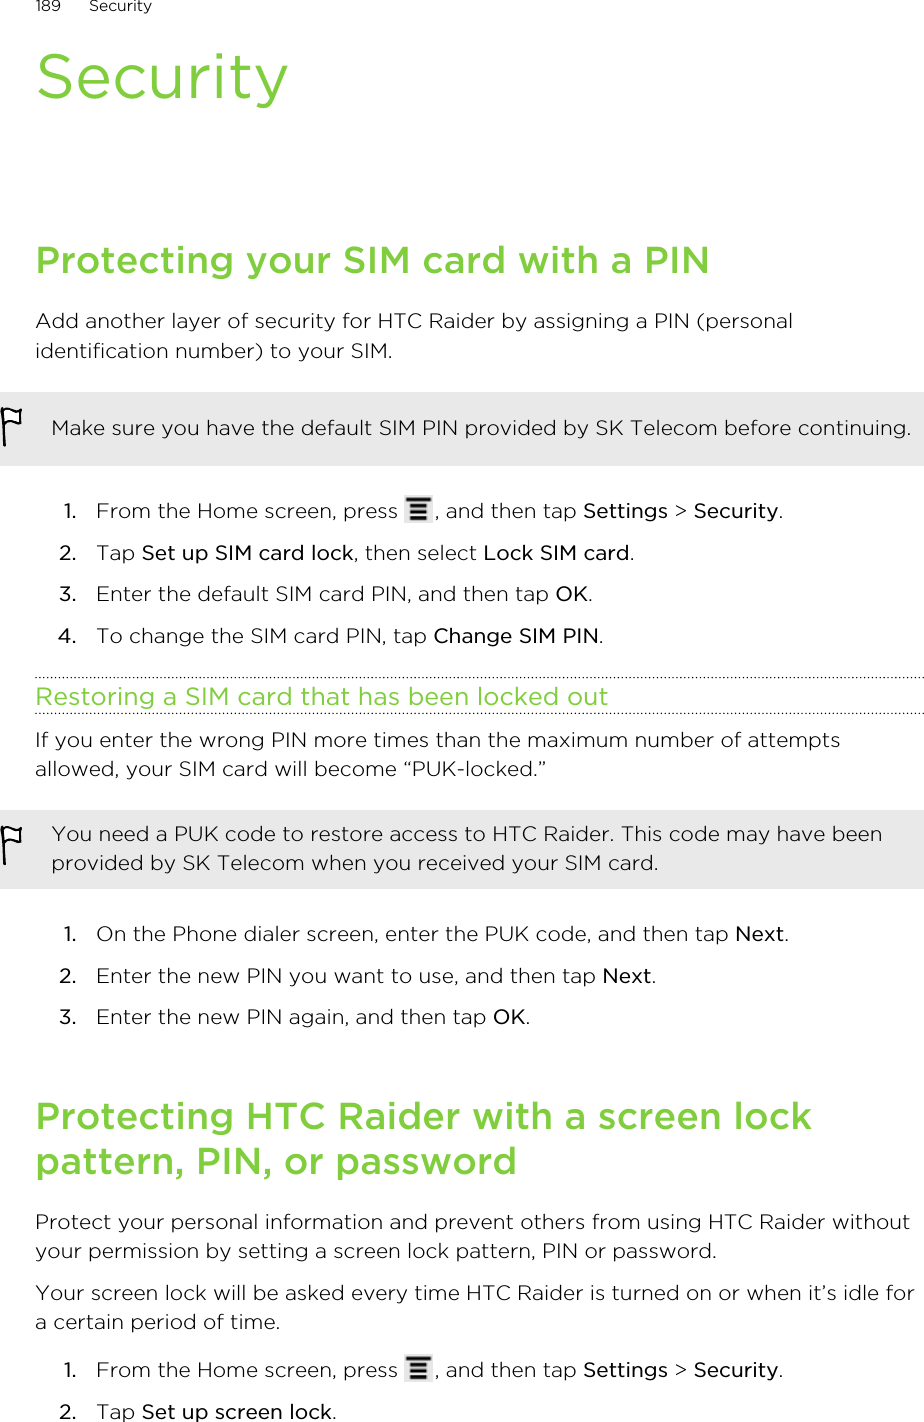 SecurityProtecting your SIM card with a PINAdd another layer of security for HTC Raider by assigning a PIN (personalidentification number) to your SIM.Make sure you have the default SIM PIN provided by SK Telecom before continuing.1. From the Home screen, press  , and then tap Settings &gt; Security.2. Tap Set up SIM card lock, then select Lock SIM card.3. Enter the default SIM card PIN, and then tap OK.4. To change the SIM card PIN, tap Change SIM PIN.Restoring a SIM card that has been locked outIf you enter the wrong PIN more times than the maximum number of attemptsallowed, your SIM card will become “PUK-locked.”You need a PUK code to restore access to HTC Raider. This code may have beenprovided by SK Telecom when you received your SIM card.1. On the Phone dialer screen, enter the PUK code, and then tap Next.2. Enter the new PIN you want to use, and then tap Next.3. Enter the new PIN again, and then tap OK.Protecting HTC Raider with a screen lockpattern, PIN, or passwordProtect your personal information and prevent others from using HTC Raider withoutyour permission by setting a screen lock pattern, PIN or password.Your screen lock will be asked every time HTC Raider is turned on or when it’s idle fora certain period of time.1. From the Home screen, press  , and then tap Settings &gt; Security.2. Tap Set up screen lock.189 Security